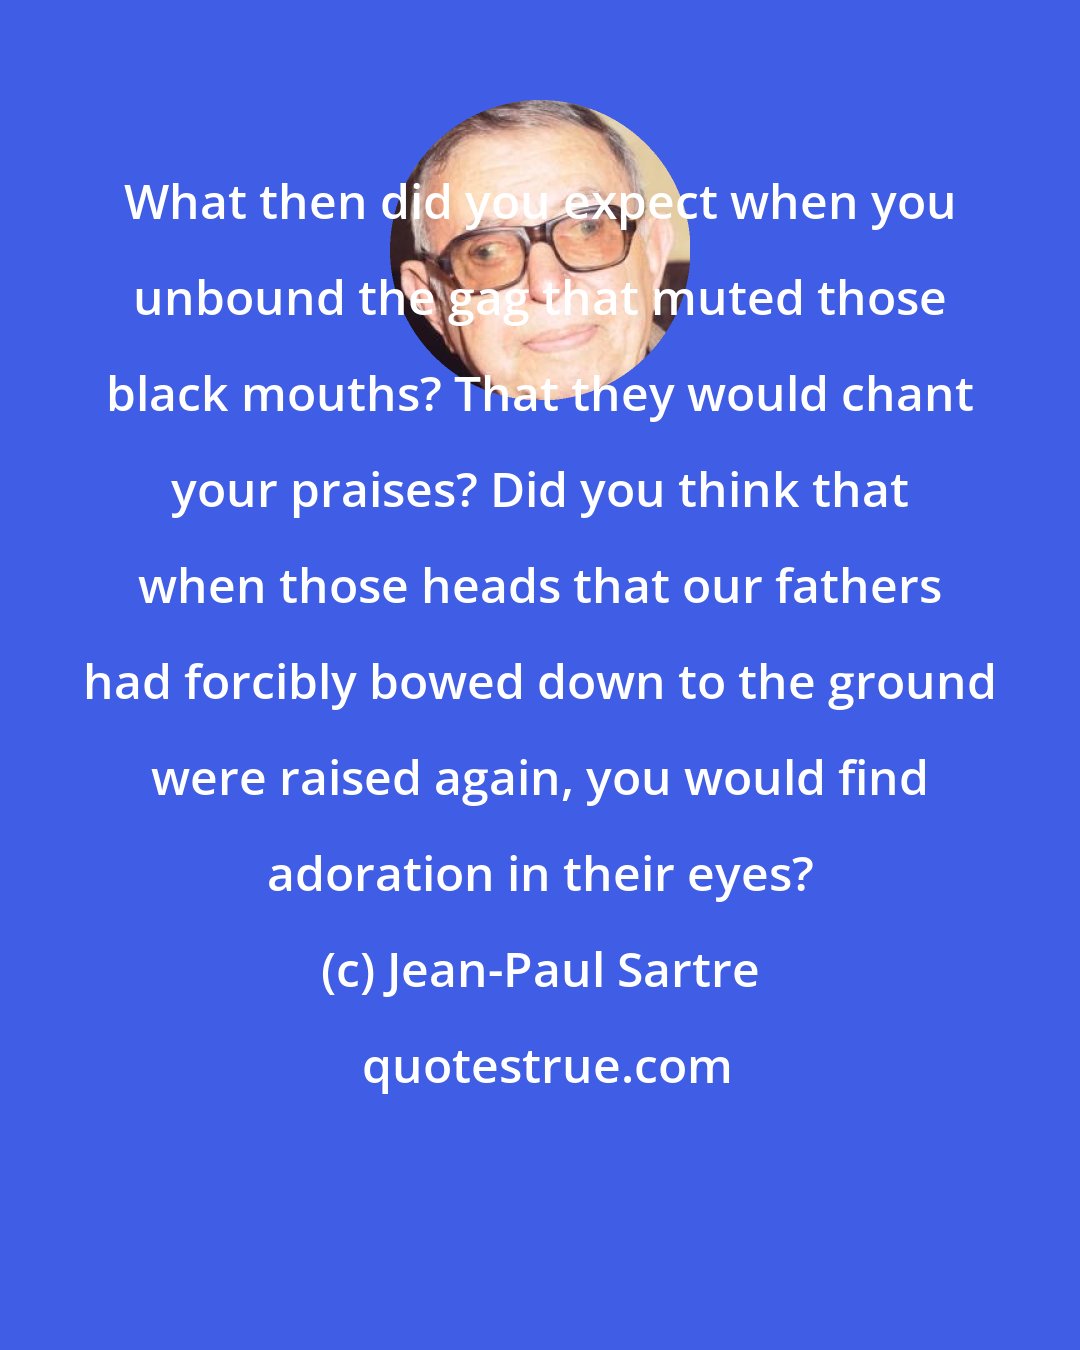 Jean-Paul Sartre: What then did you expect when you unbound the gag that muted those black mouths? That they would chant your praises? Did you think that when those heads that our fathers had forcibly bowed down to the ground were raised again, you would find adoration in their eyes?